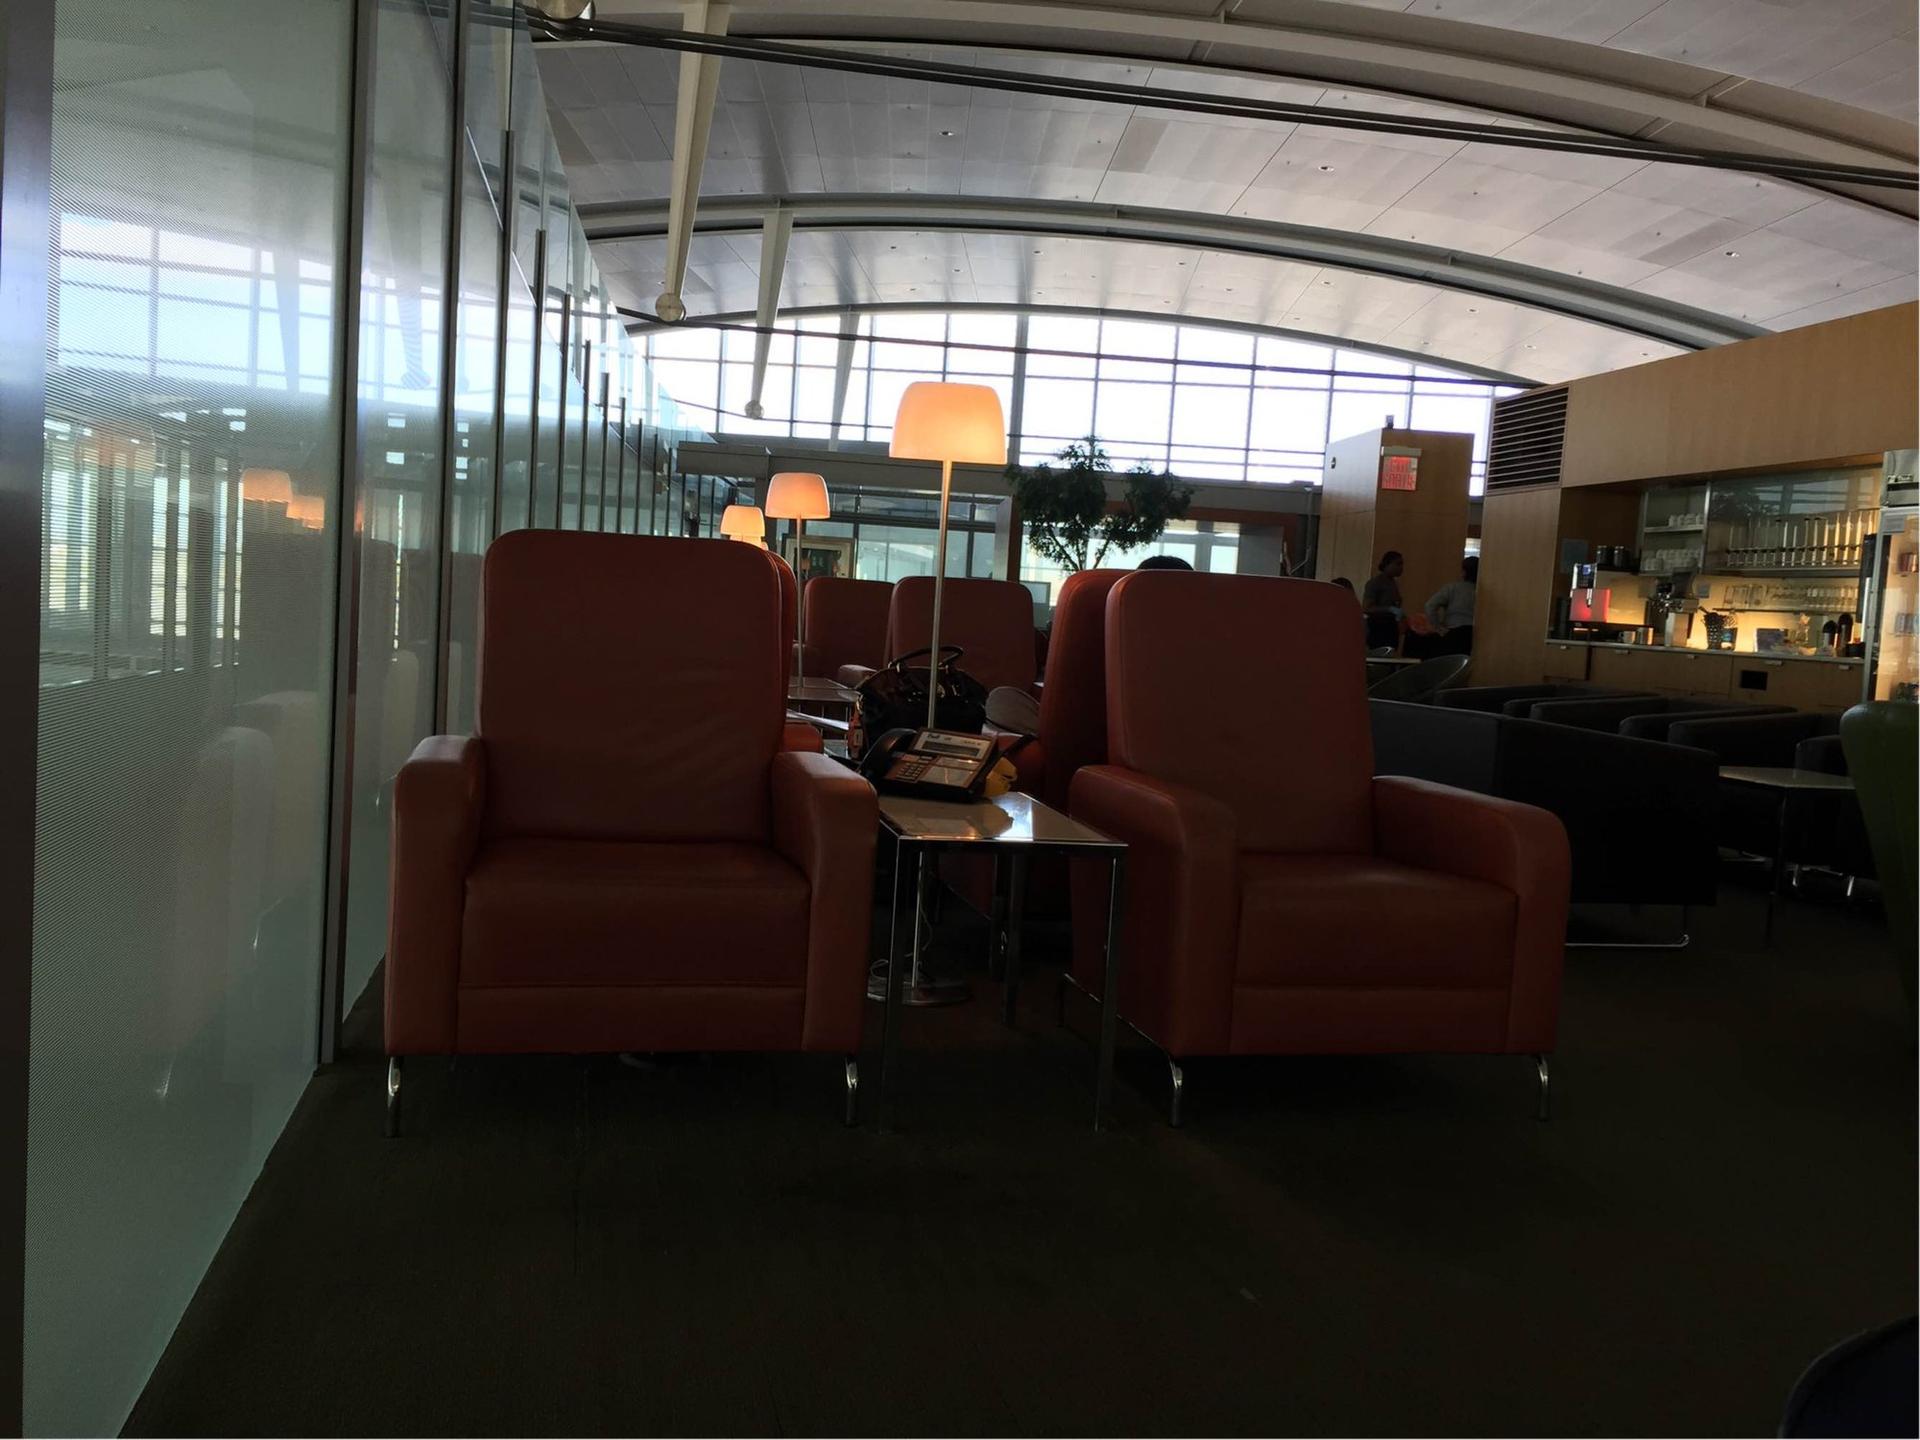 Air Canada Maple Leaf Lounge image 7 of 27